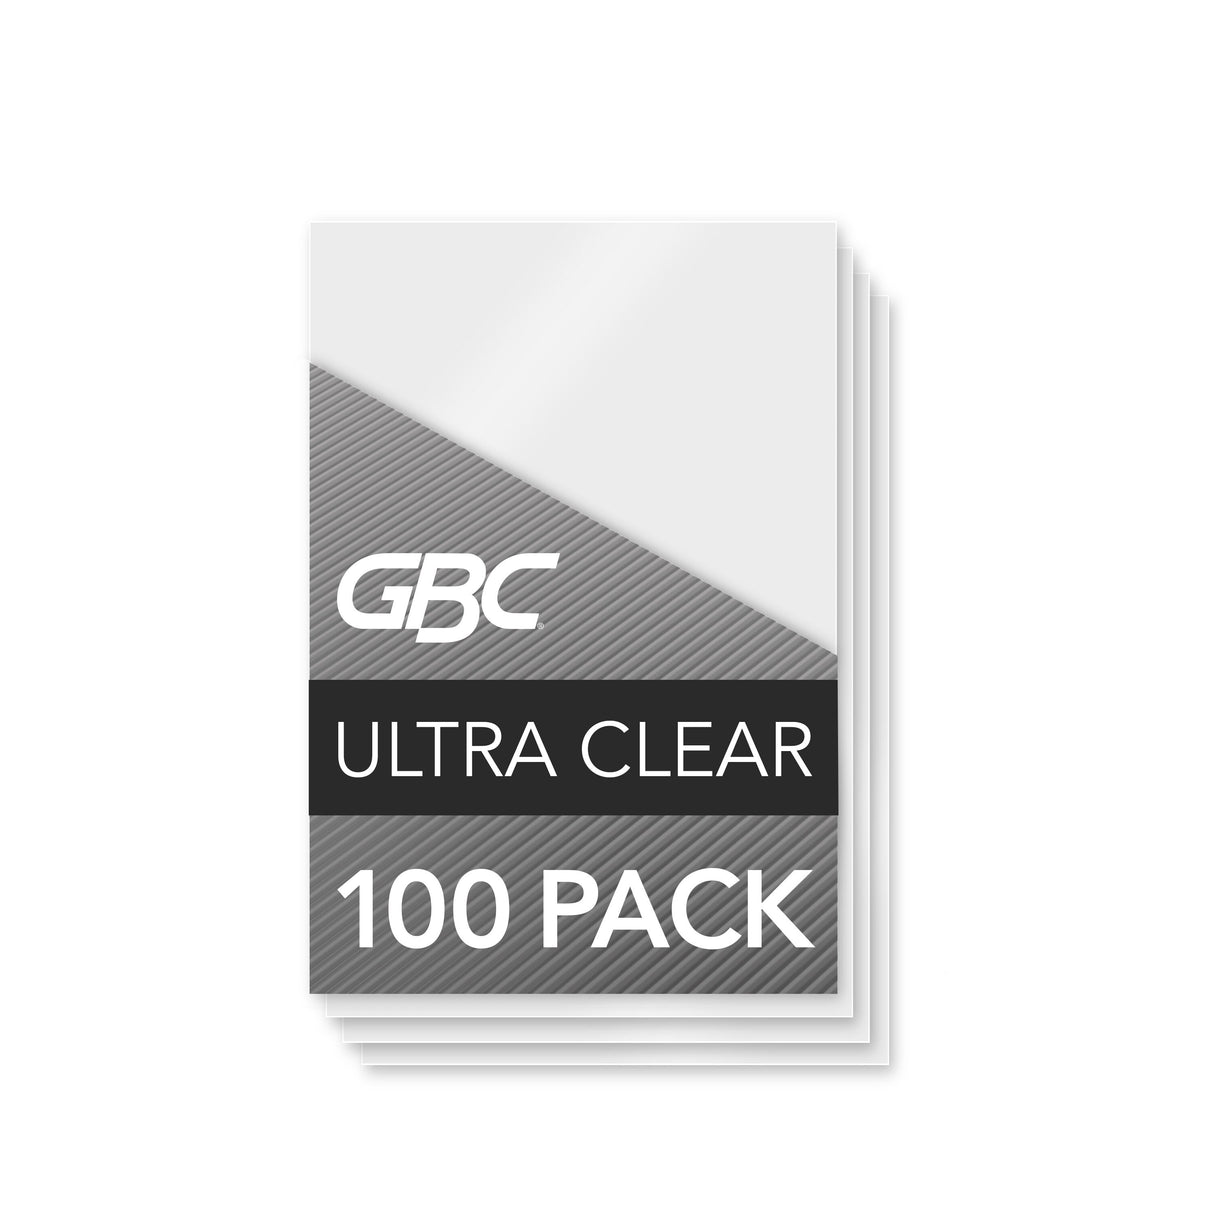 GBC UltraClear Thermal Laminating Pouches - ID Size, 5 mil, 100 Pack